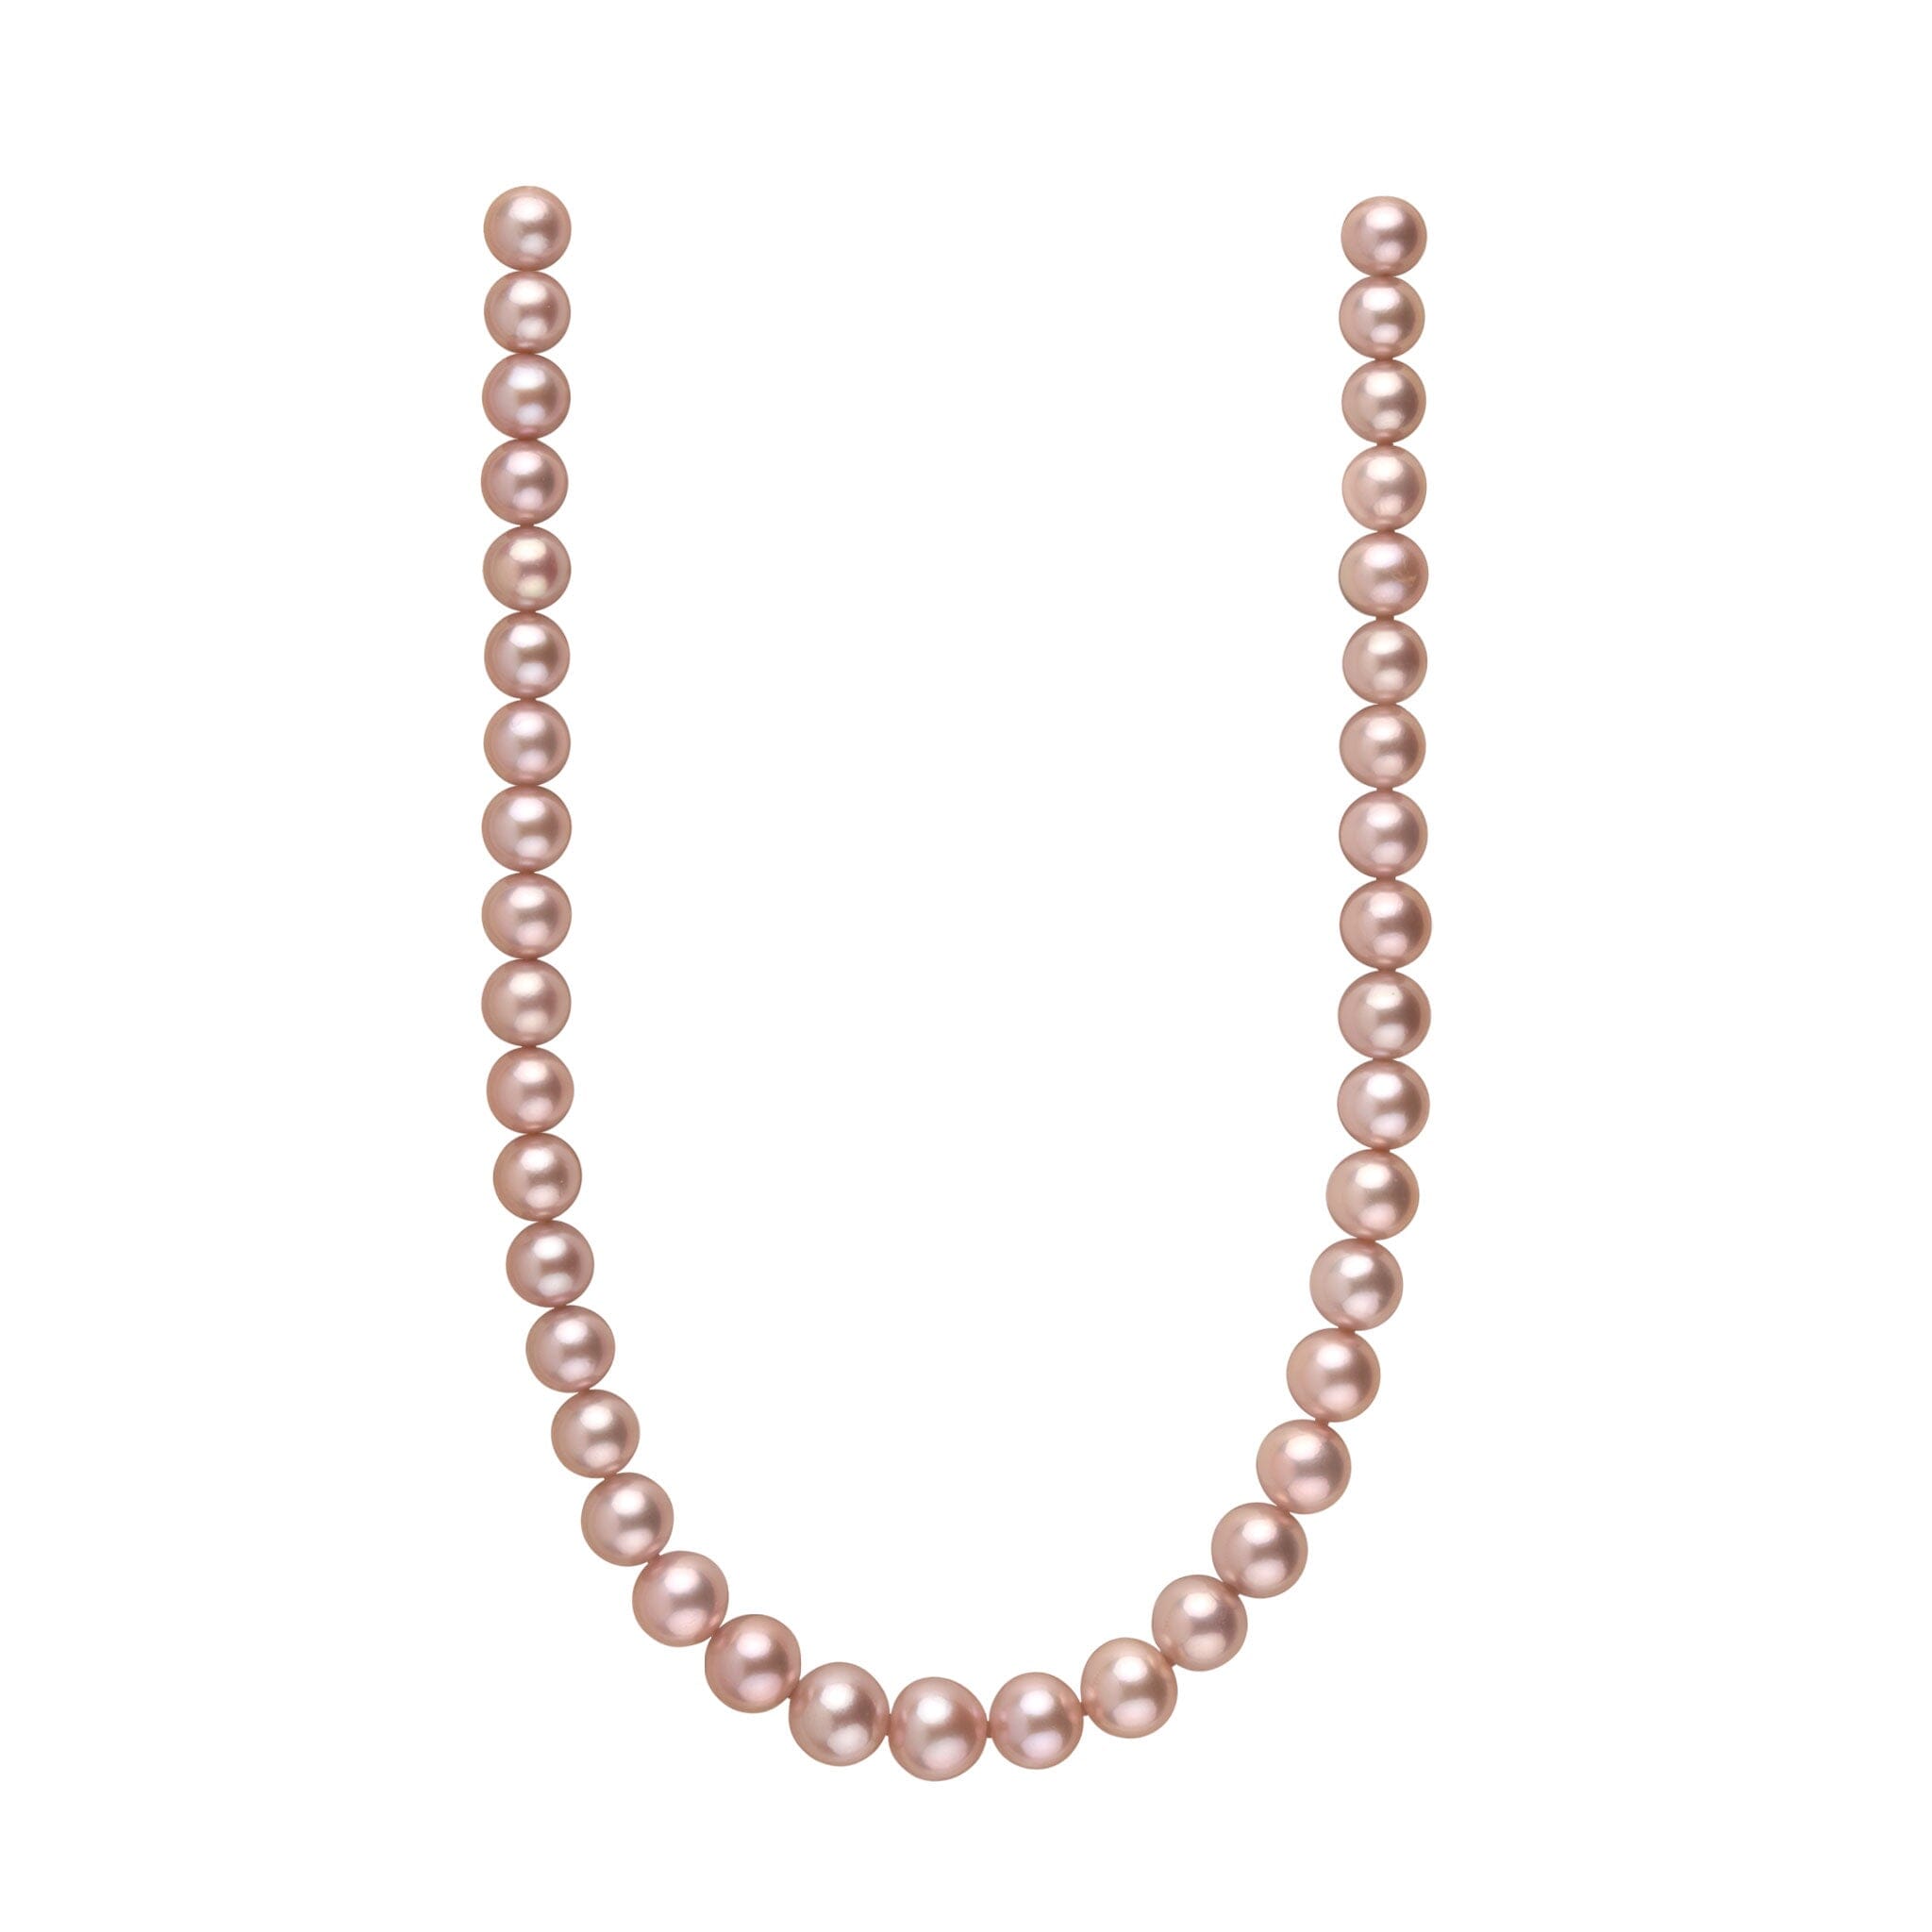 9.8-11.8 mm Blush Pink Edison Freshwater Pearl Necklace